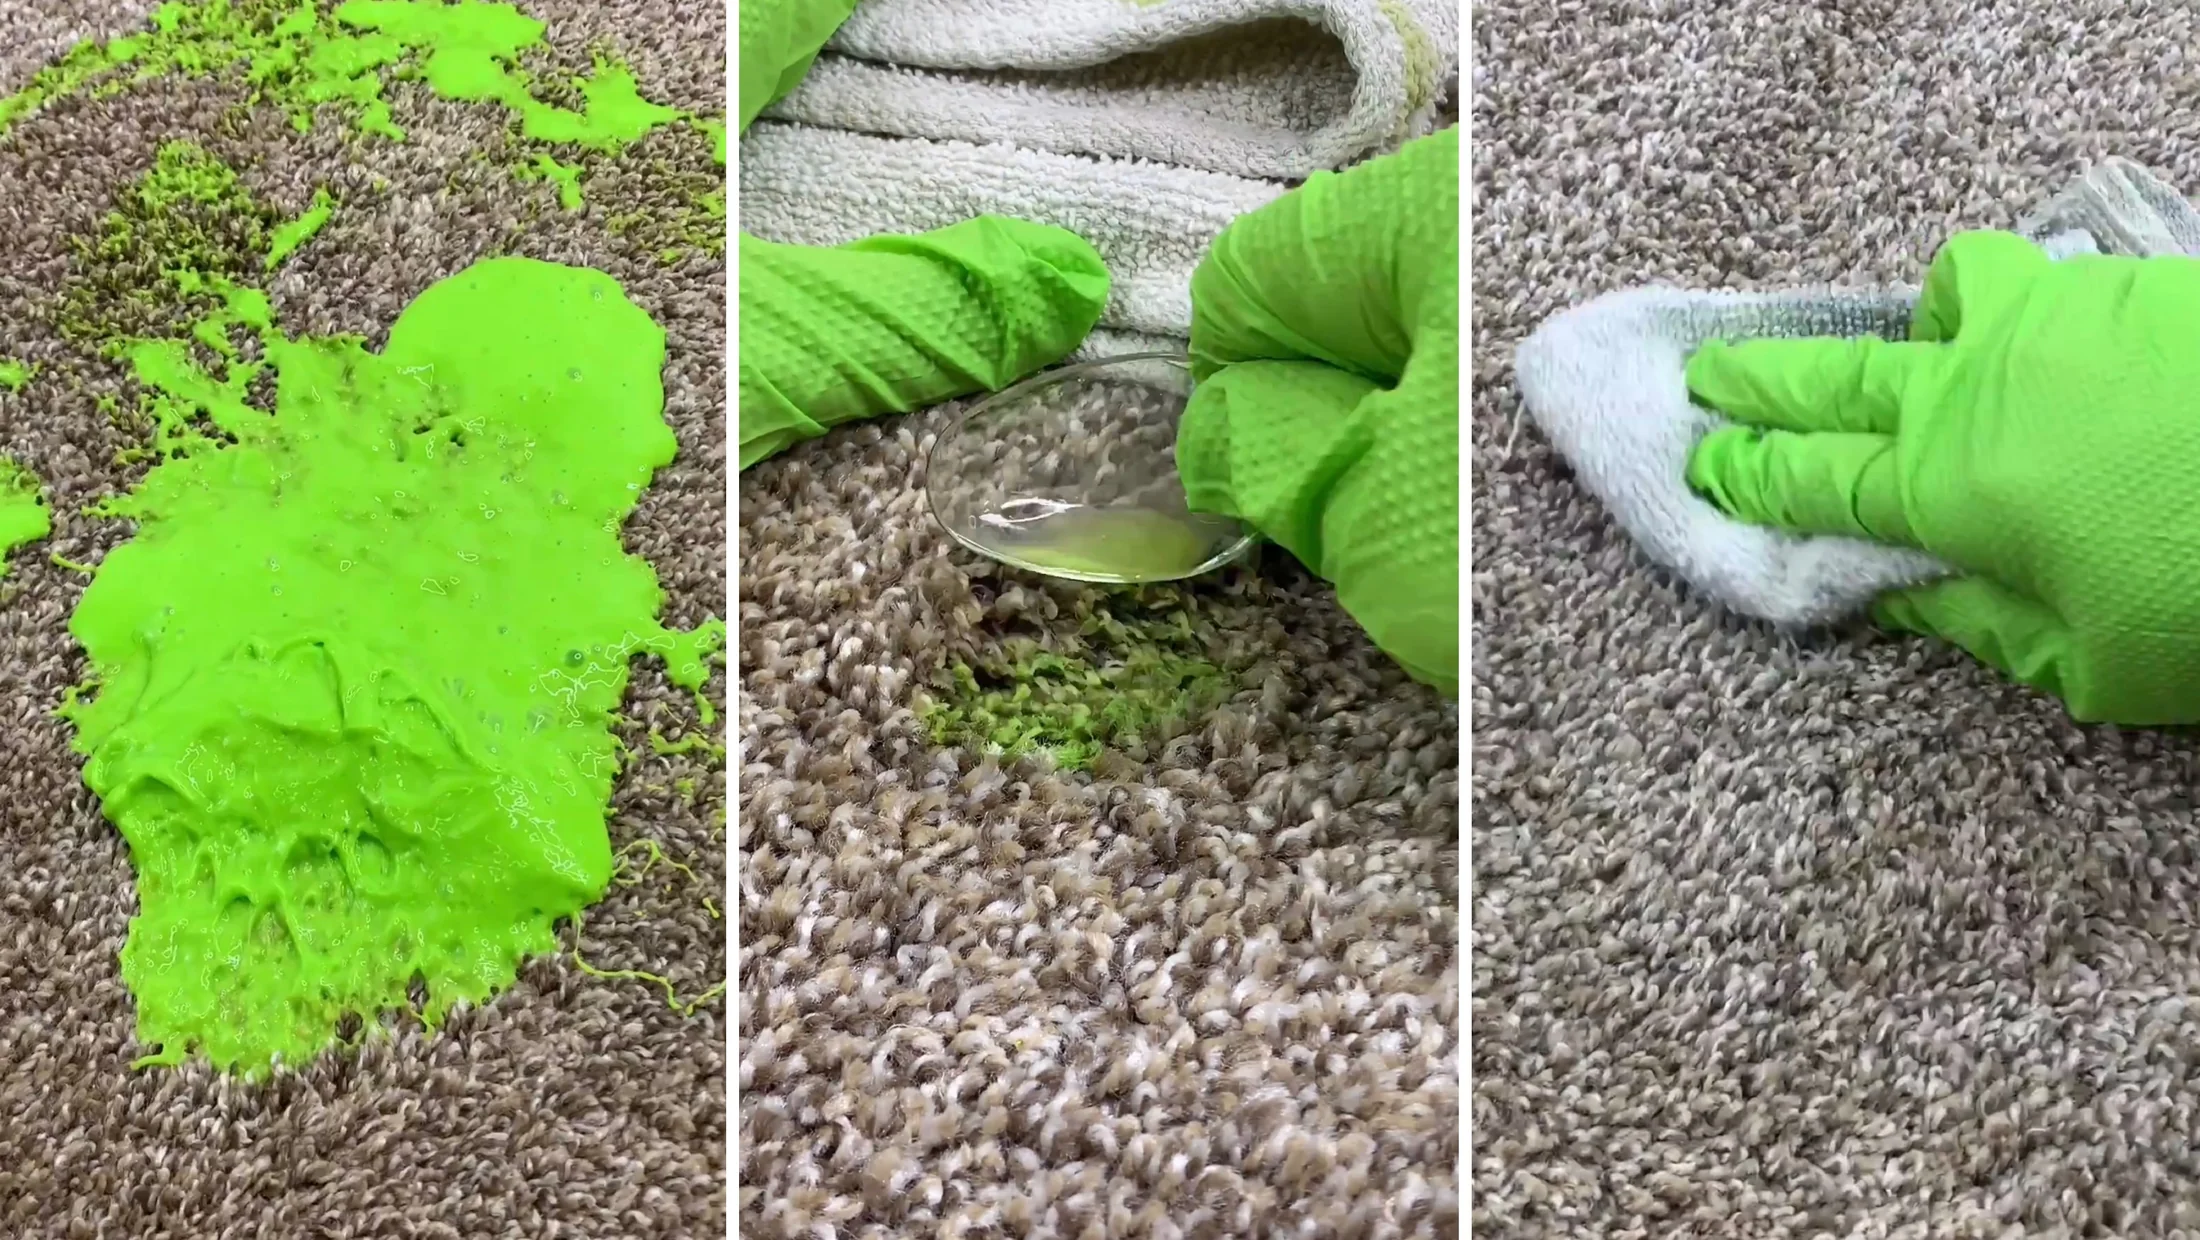 How To Remove Slime From Carpet Like A